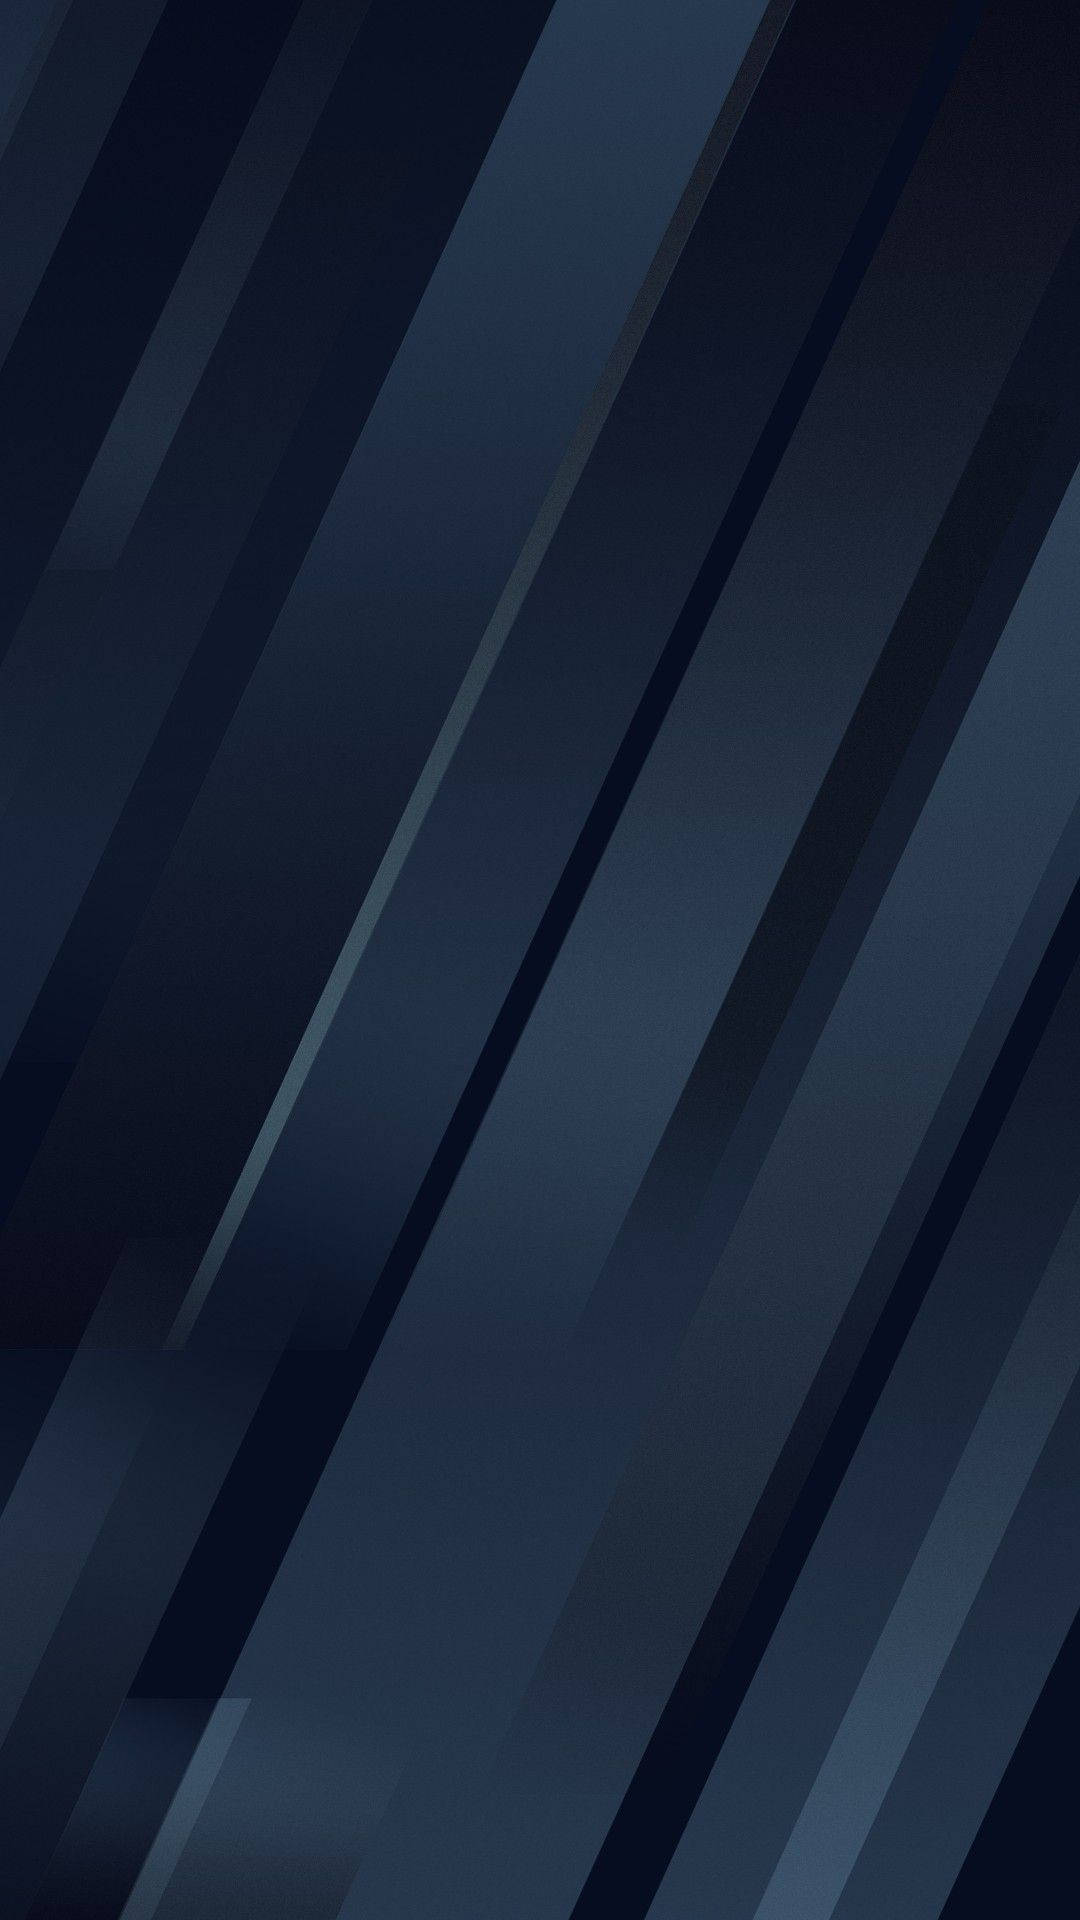 Get the stylish Dark Blue iPhone and stay ahead of the game Wallpaper